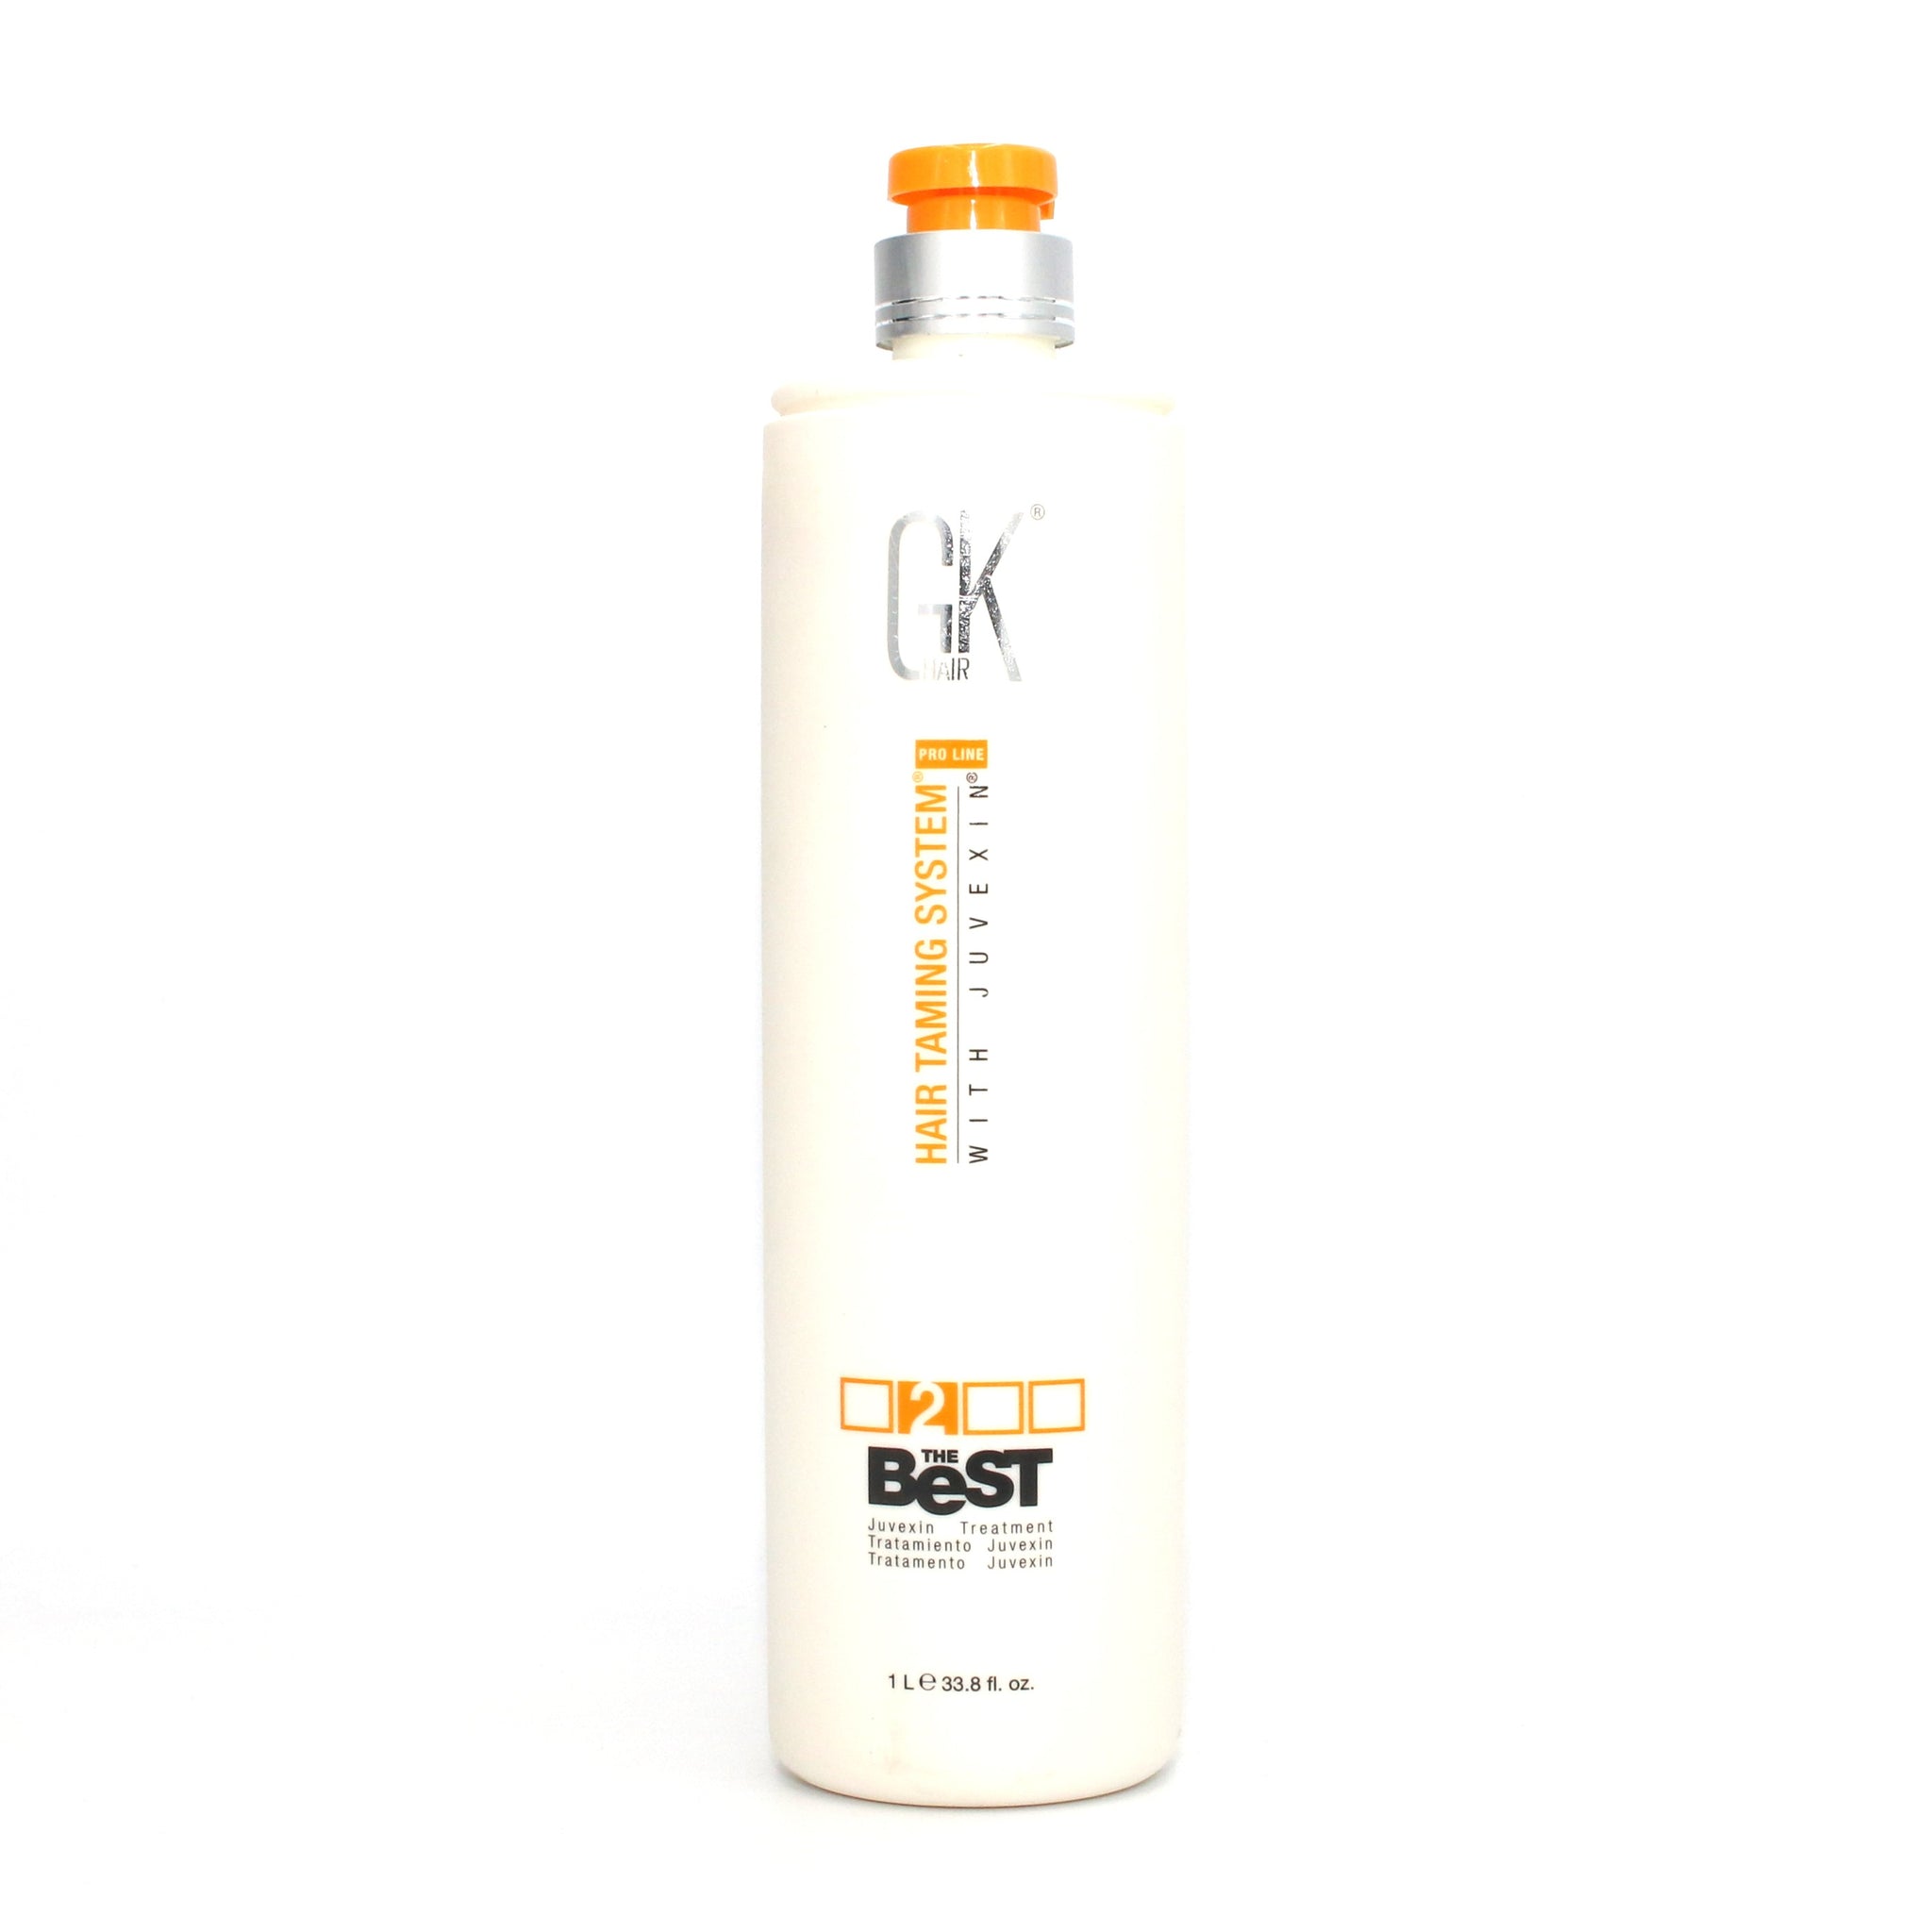 GK HAIR The Best Taming System 2 Juvexin Treatment 33.8 oz